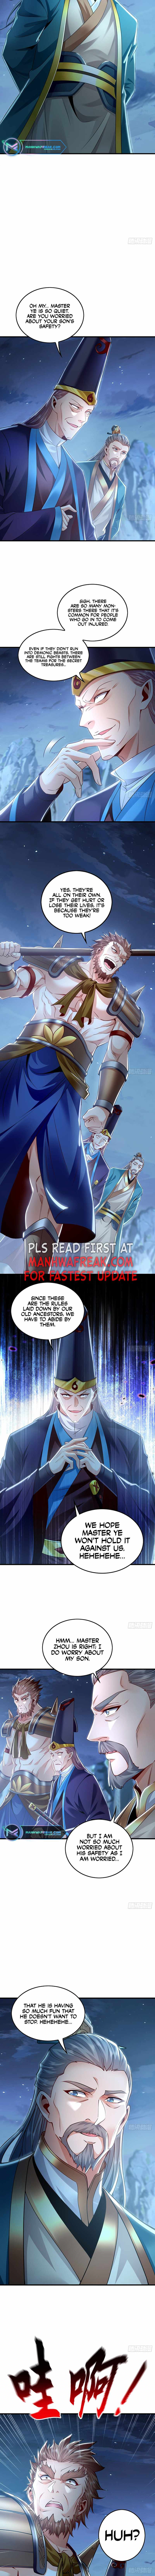 1 Million Times Attack Speed Chapter 13-eng-li - Page 5